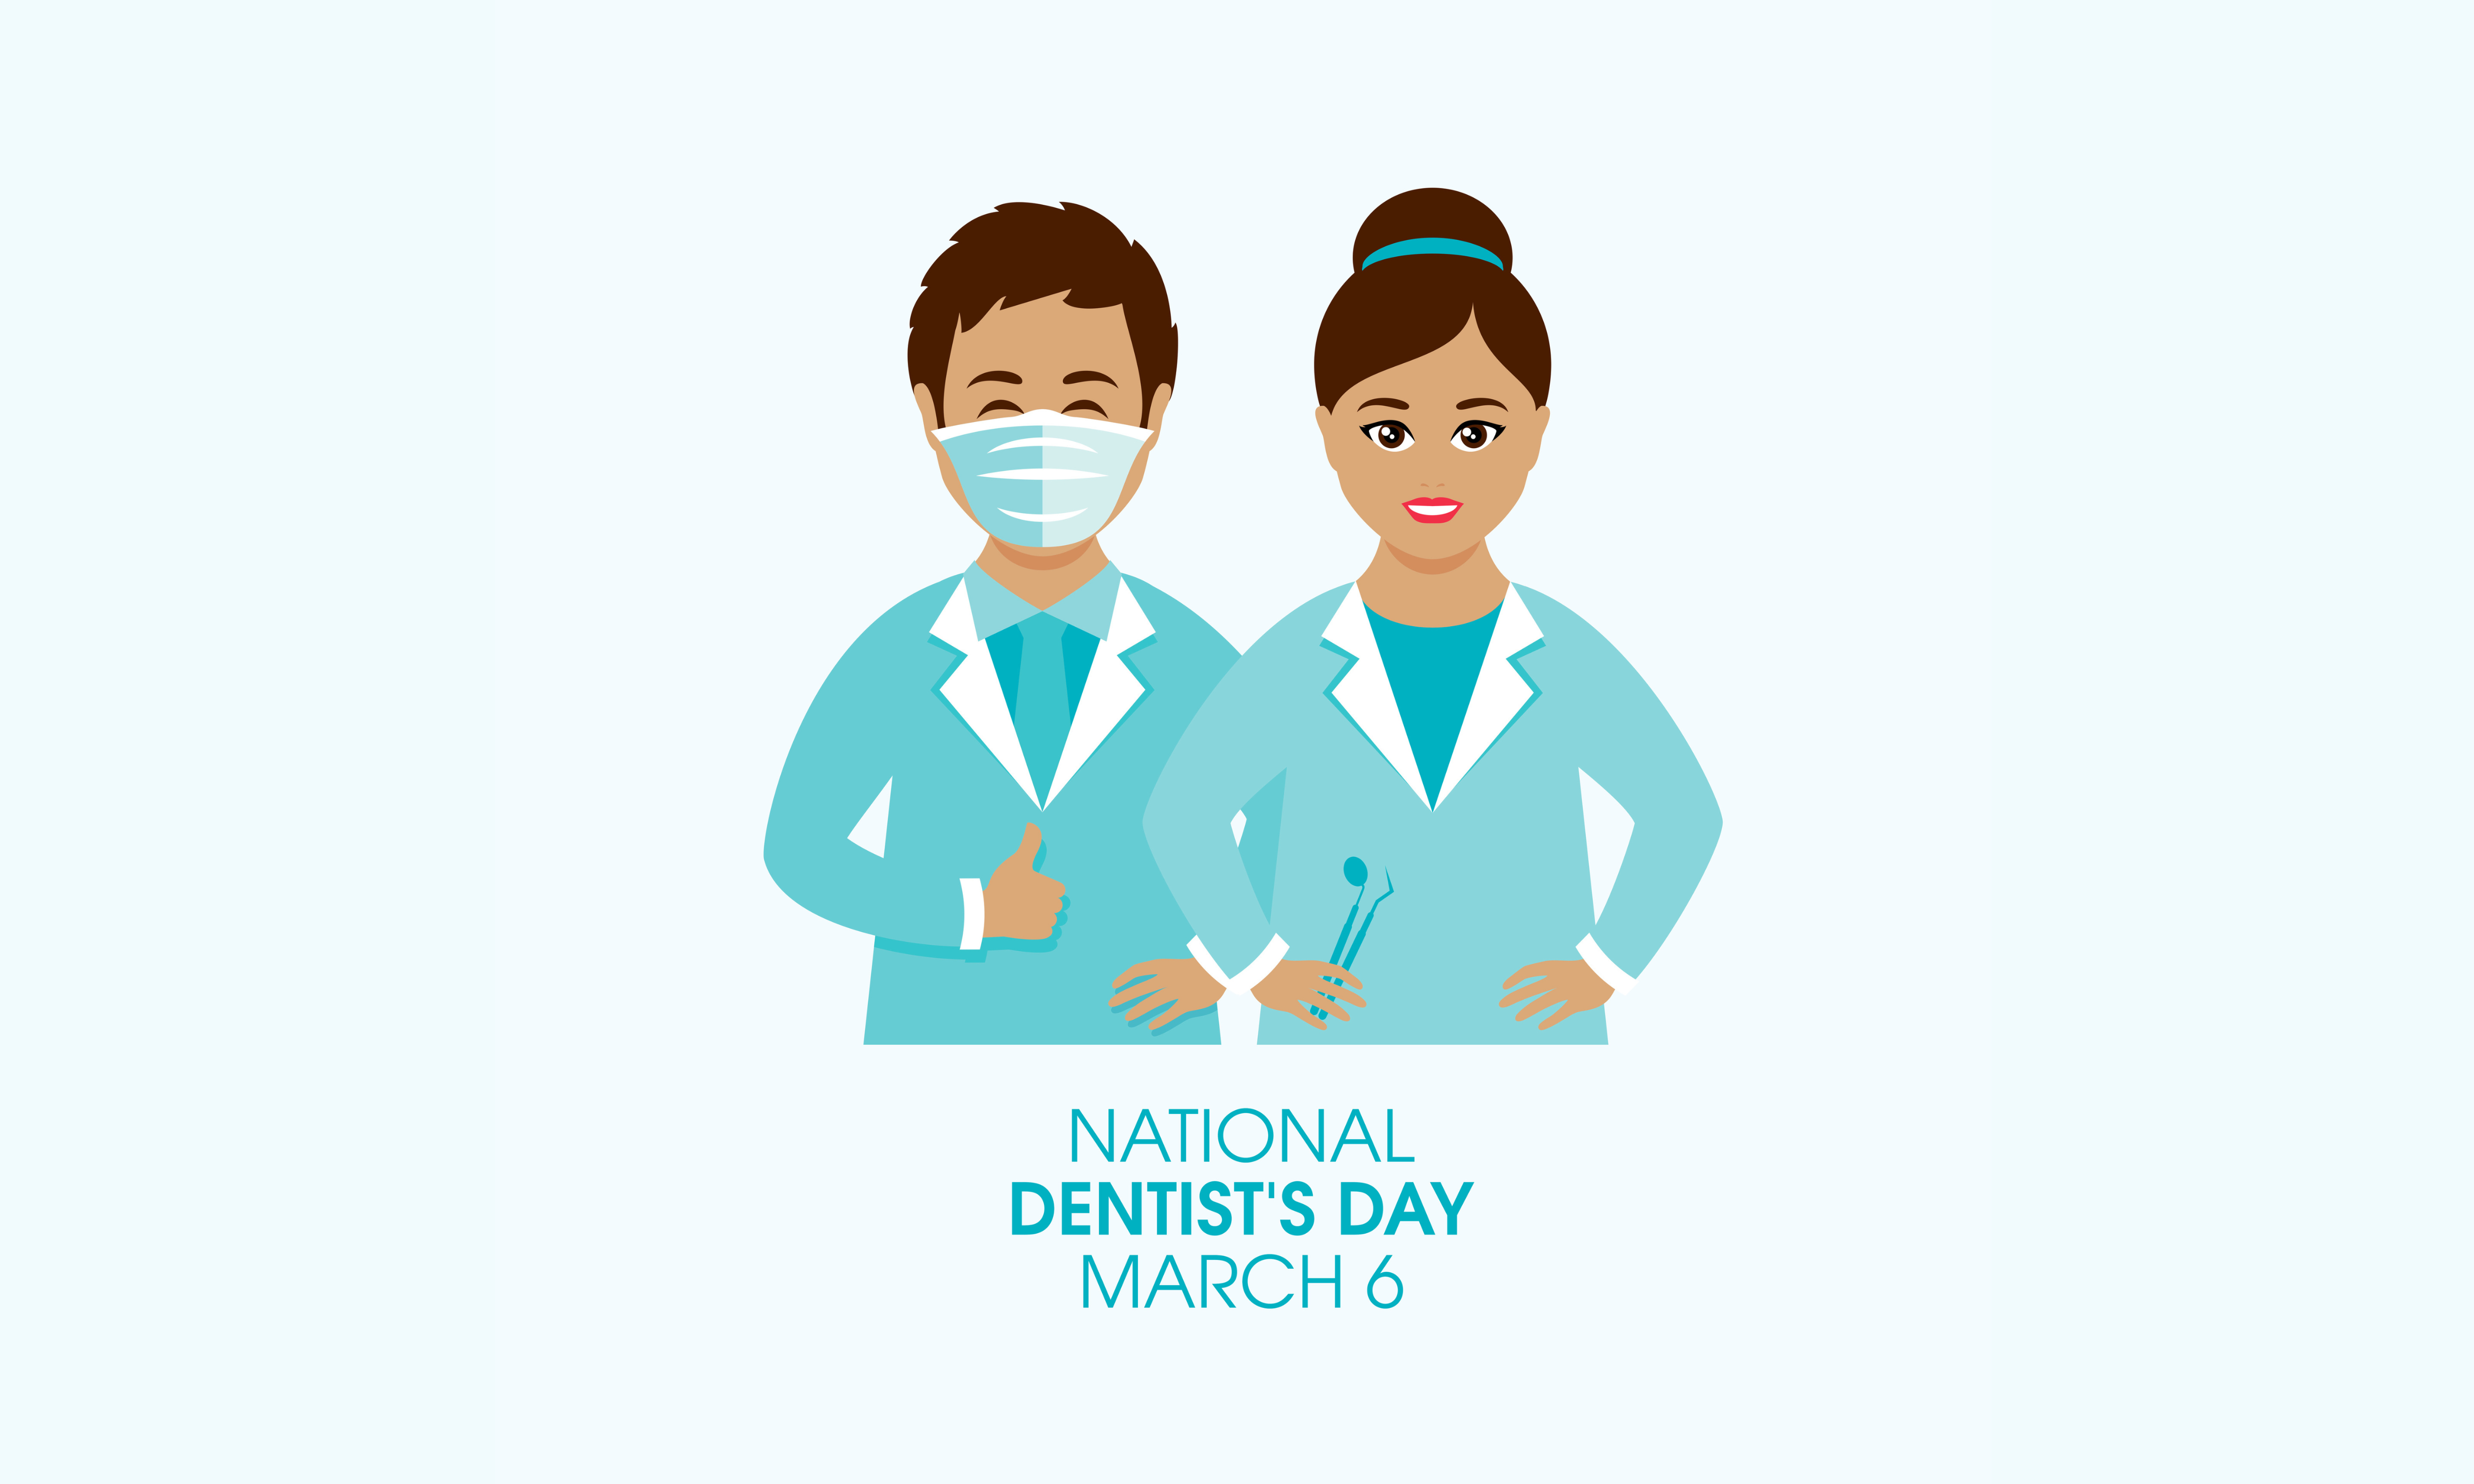 National Dentists Day honors dentists and shines spotlight on oral health